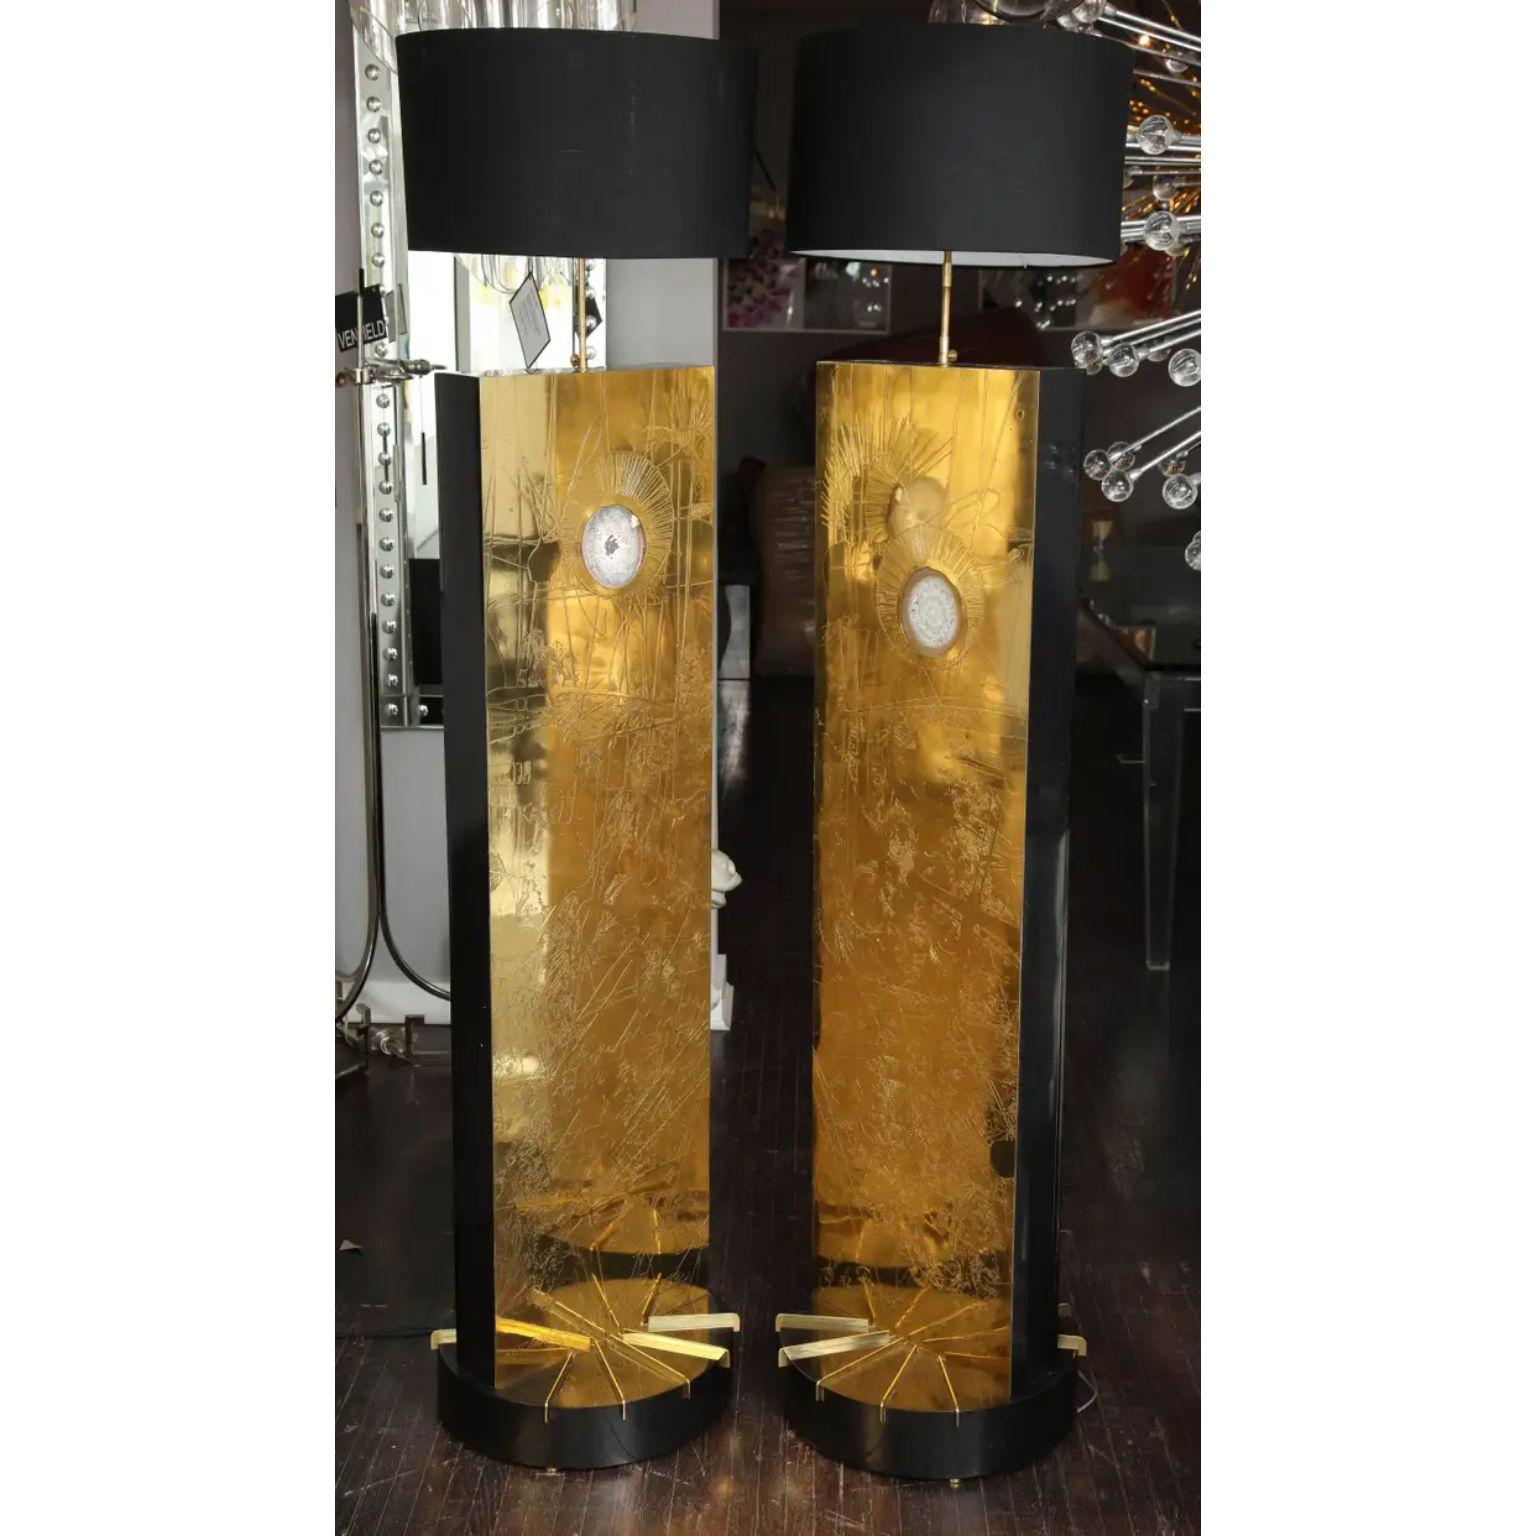 Set Of 2 Rectangle Base Brass Floor Lamps by Brutalist Be
One Of A Kind.
Dimensions: D 23 x W 20 x H 175 cm.
Materials: Brass and agate stone.

Brass acid etched with a luxurious shiny finish with agate stone inlay, a stunning floor lamp with black